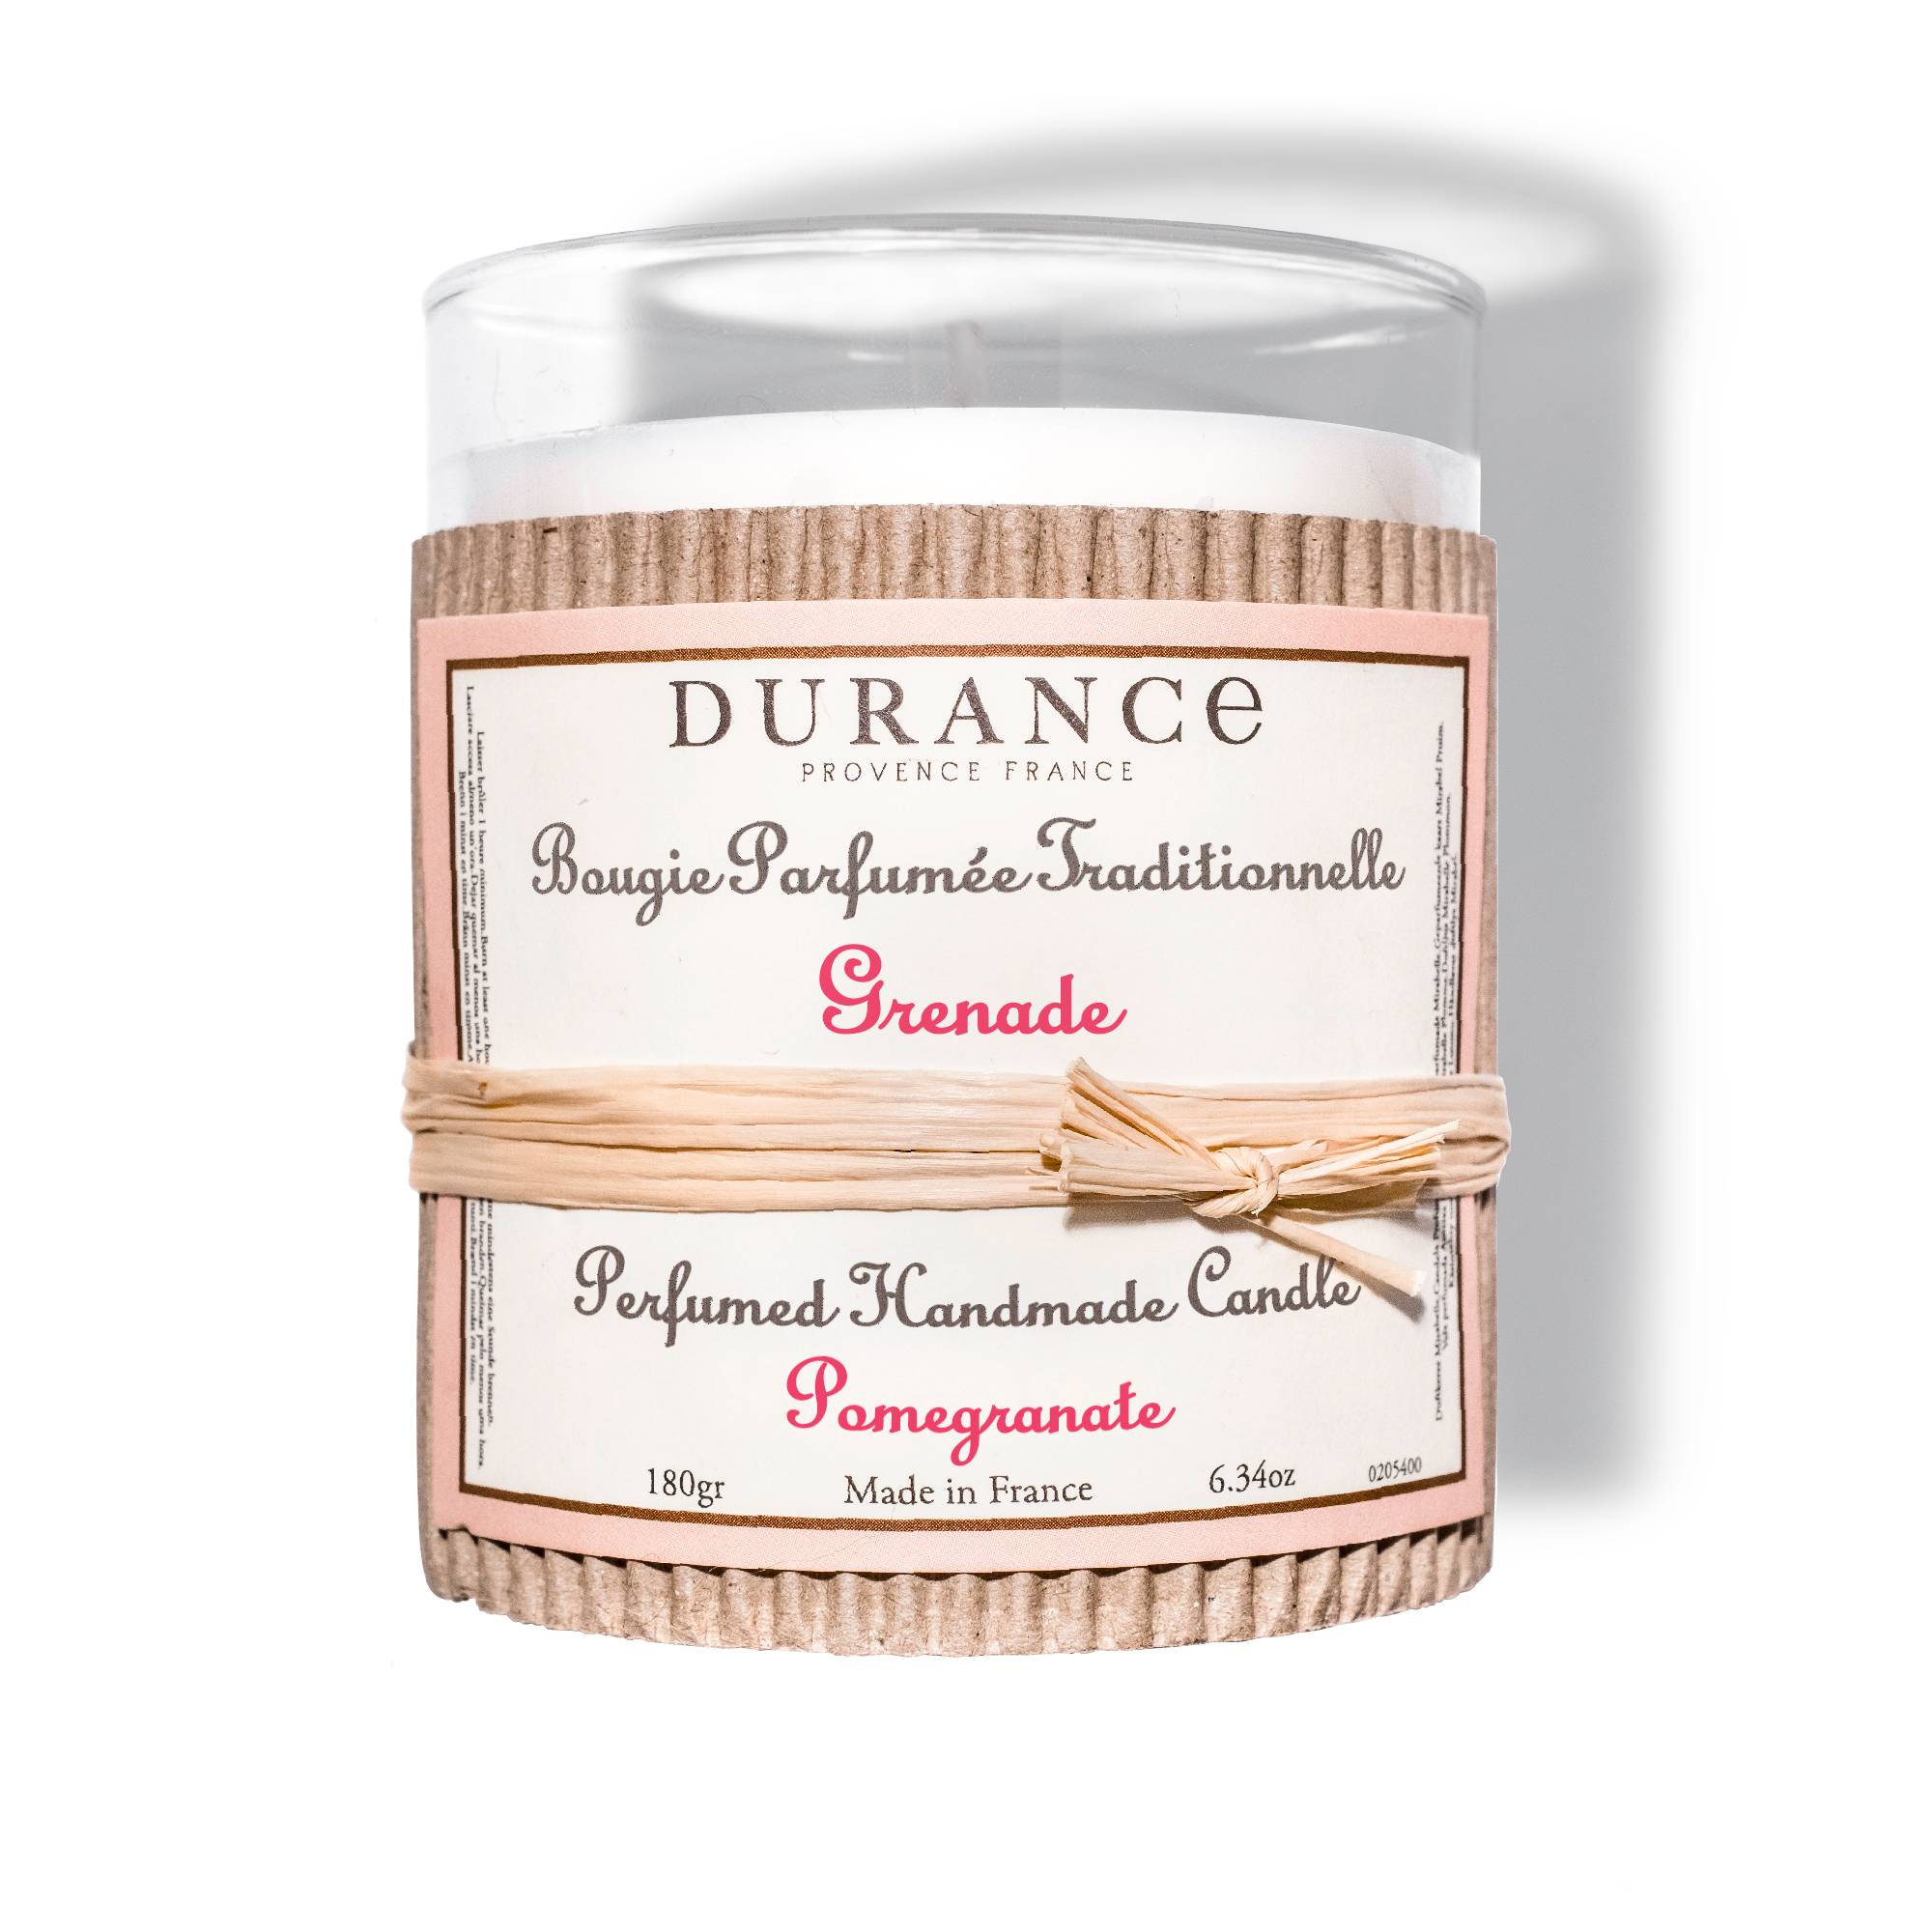 Bougie Traditionnelle Grenade 180g - Durance